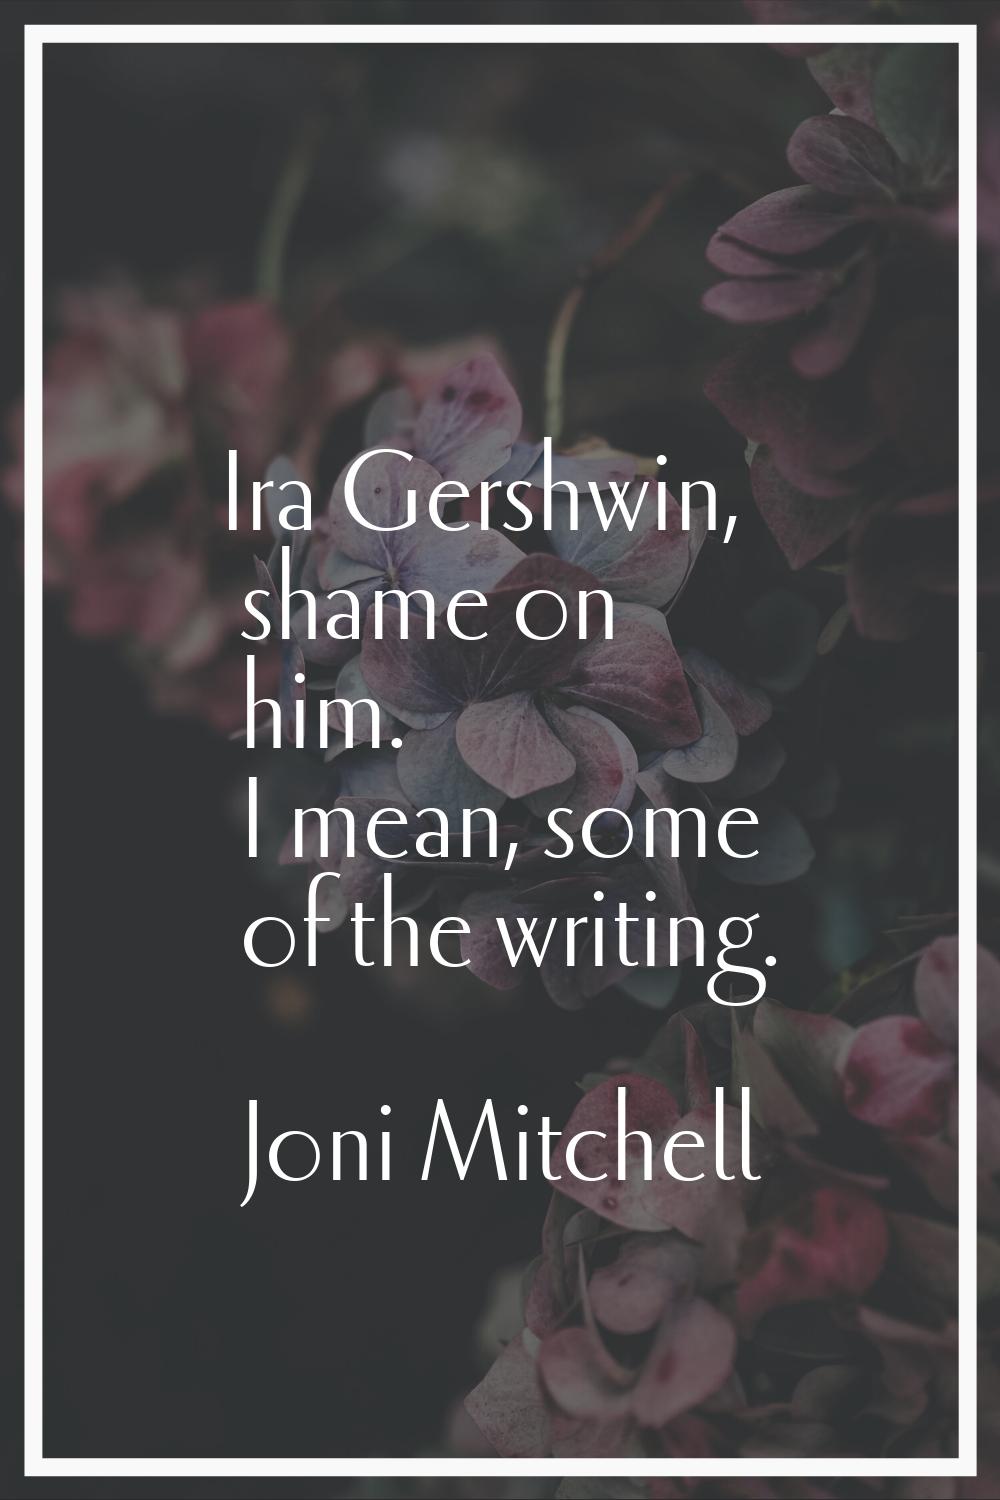 Ira Gershwin, shame on him. I mean, some of the writing.